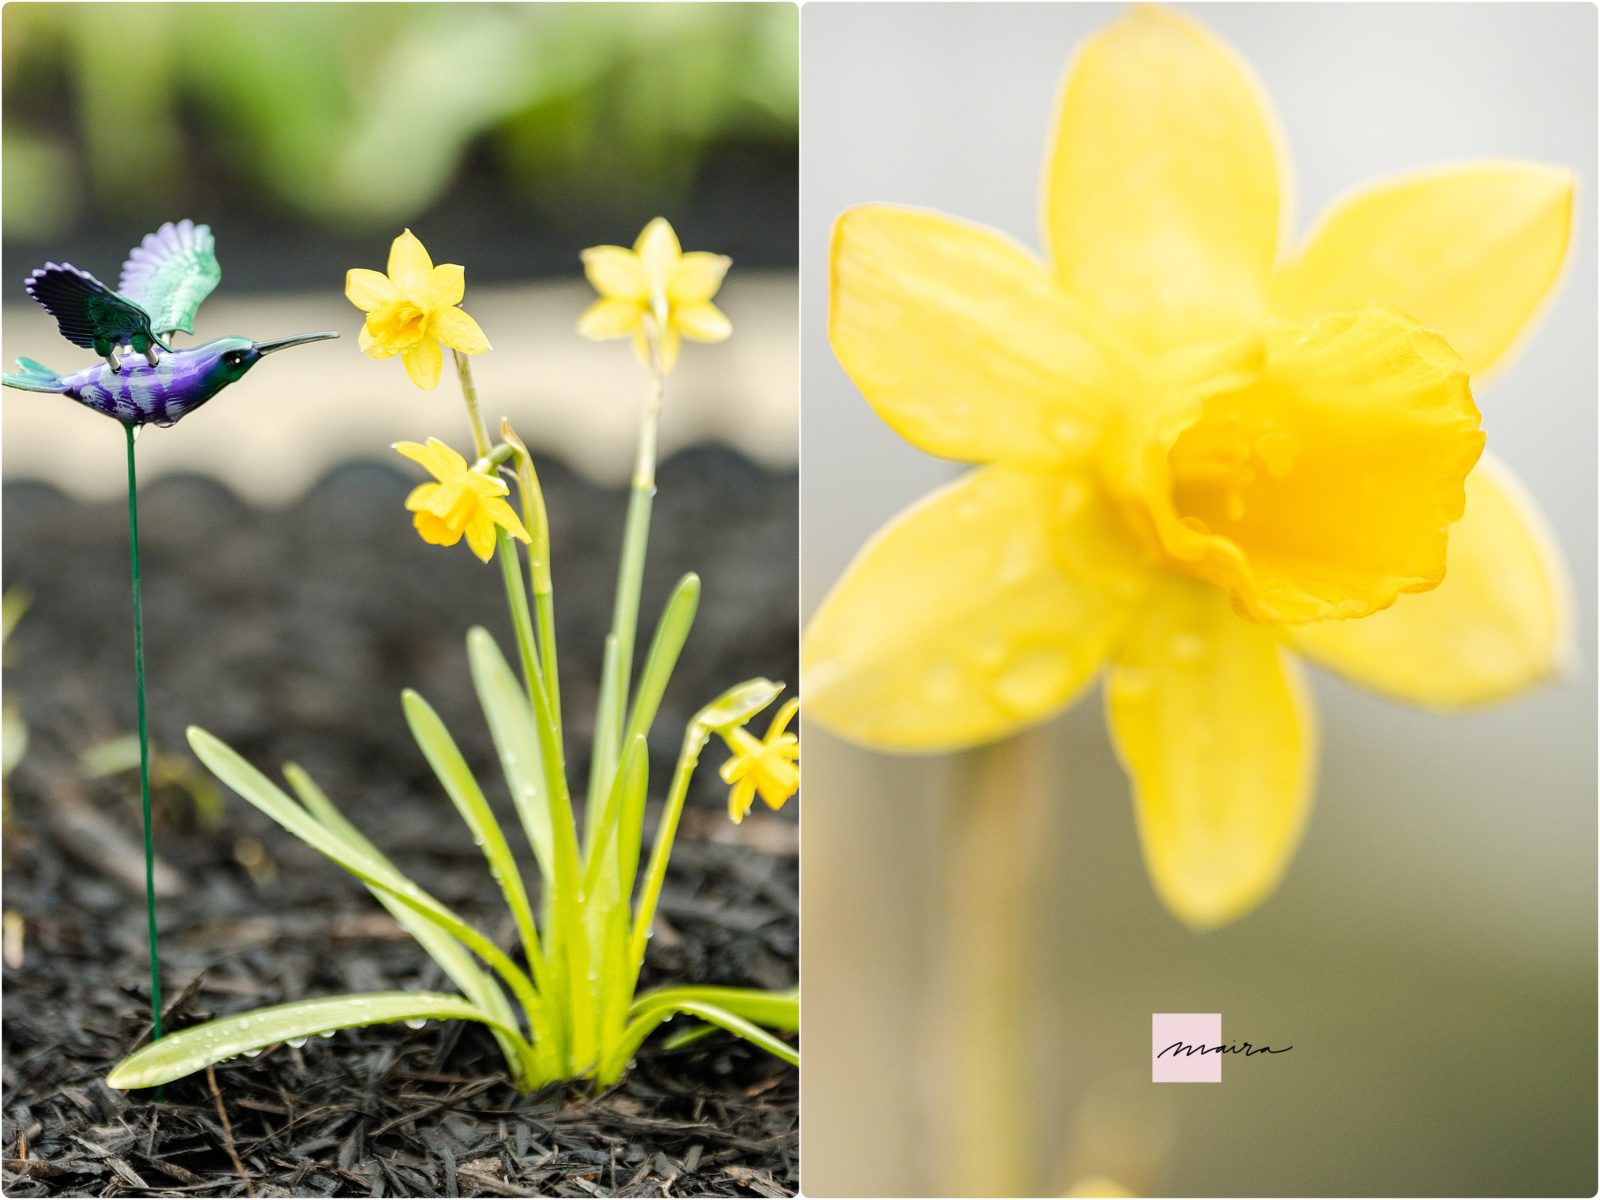 Perennials, Hyacinth, Daffodil, Dormant plnats, before and after growth photos, Spring flowers-2